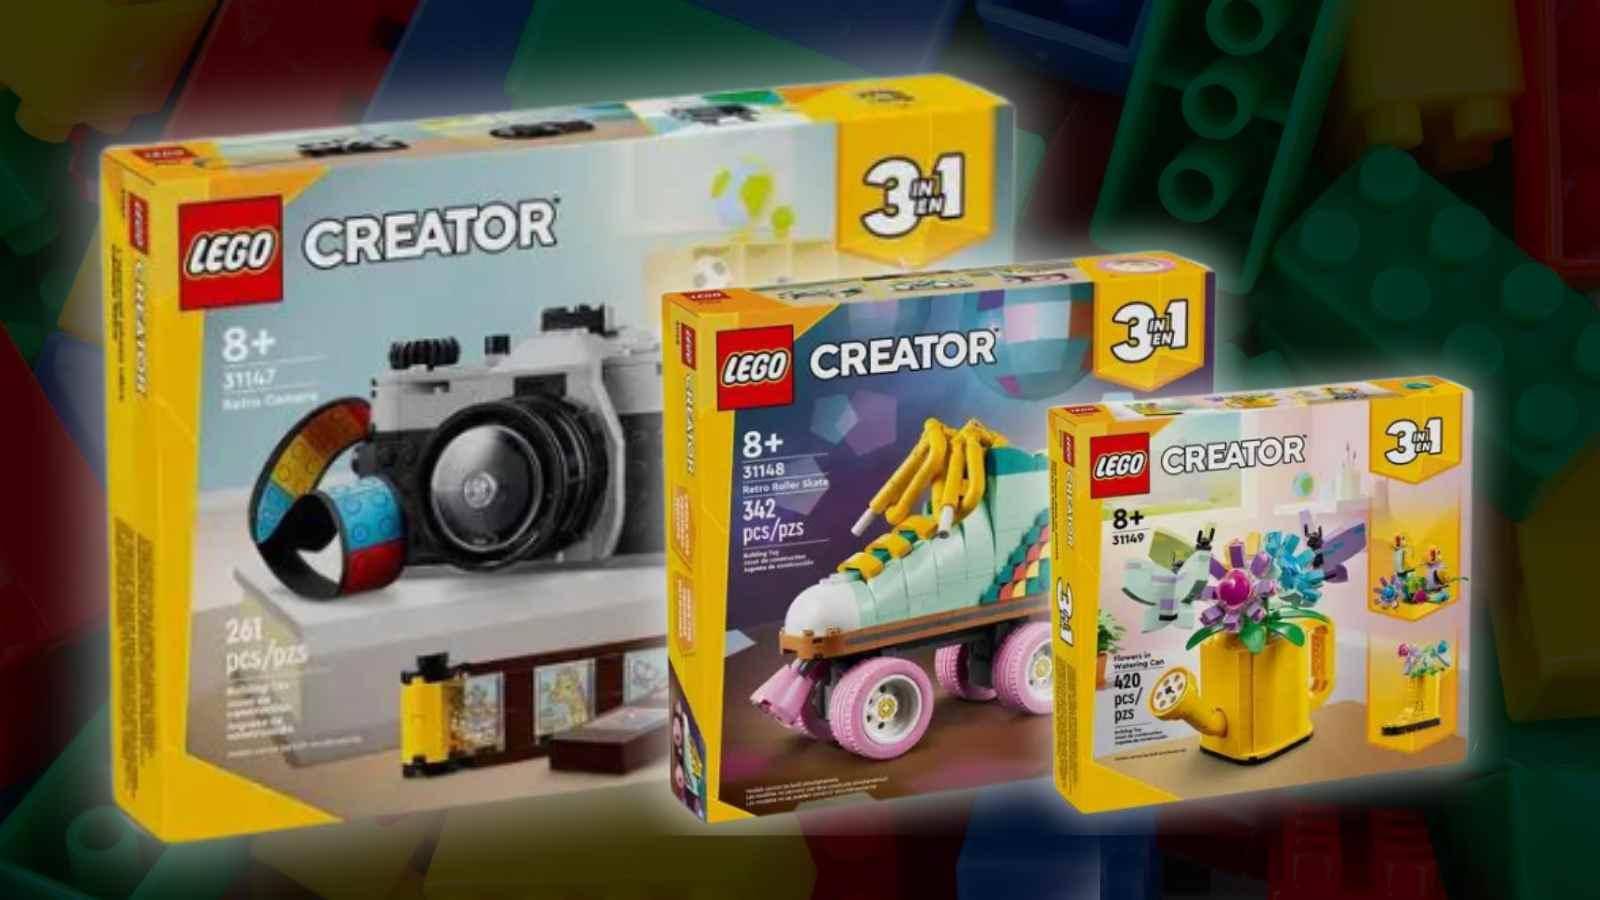 Three of the new LEGO Creator 3in1 sets discounted at Best Buy on a LEGO background